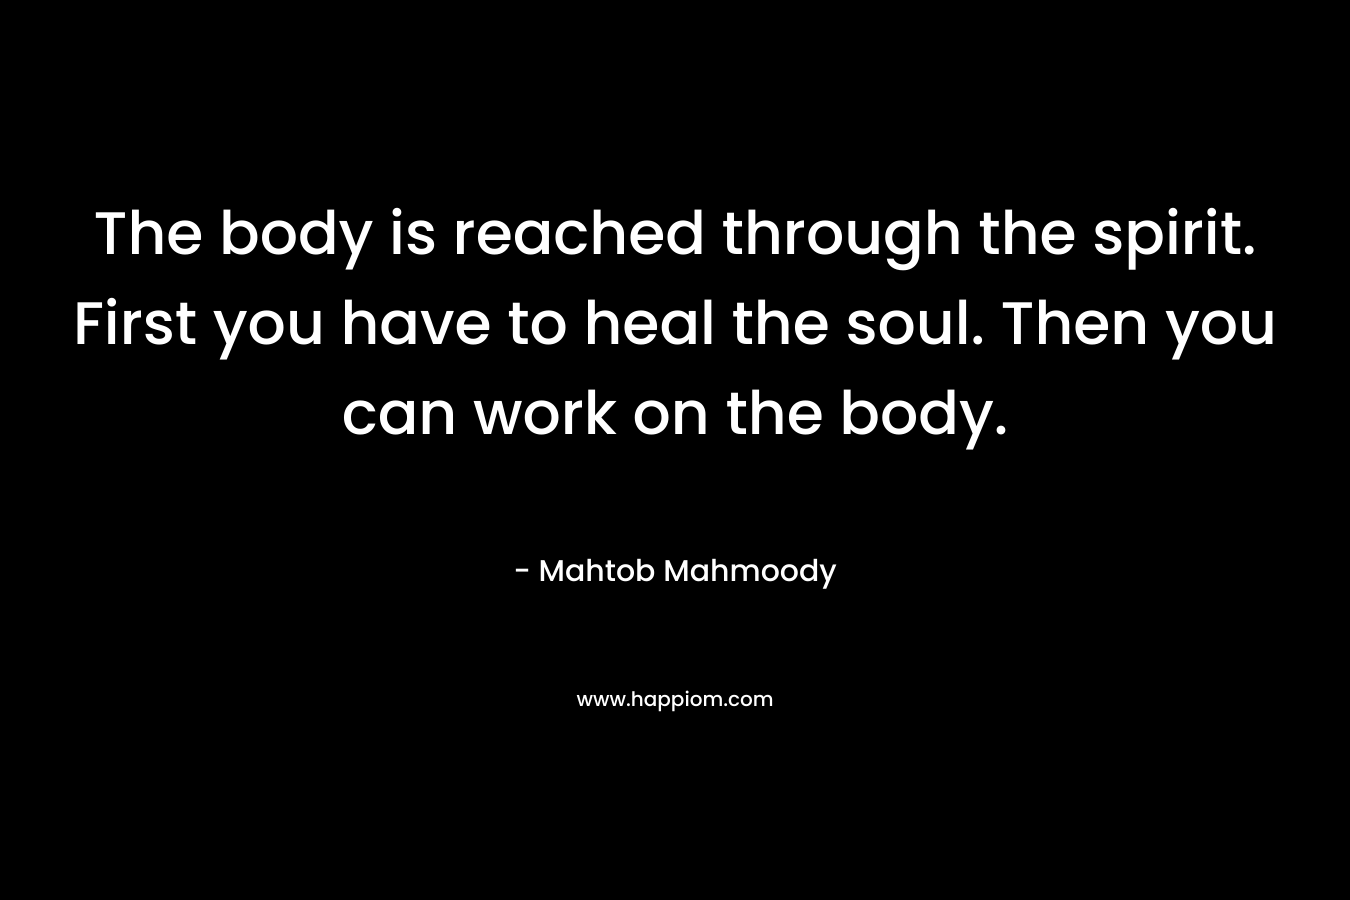 The body is reached through the spirit. First you have to heal the soul. Then you can work on the body.